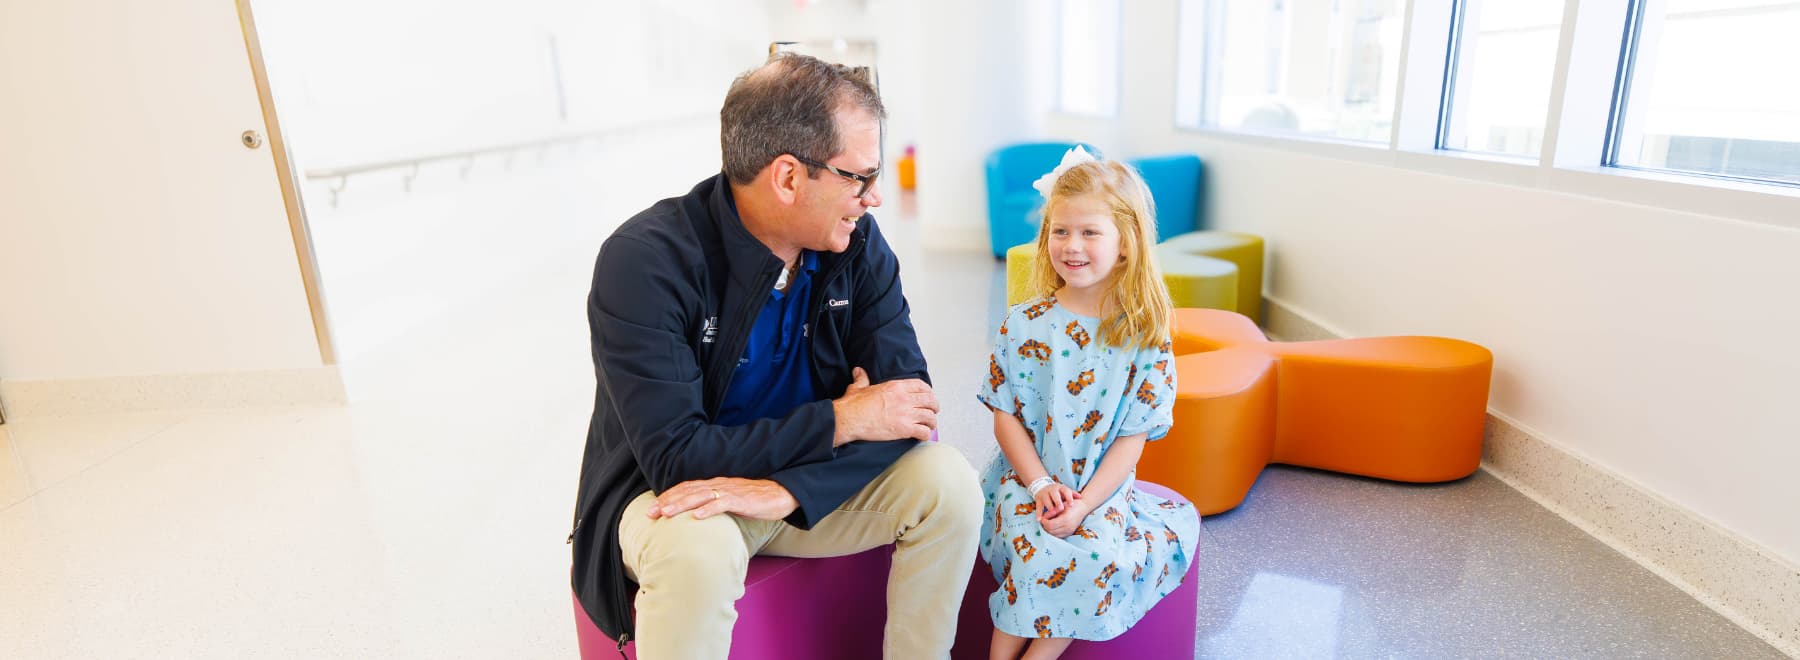 Dr. Jeffrey Carron with young patient in hospital gown